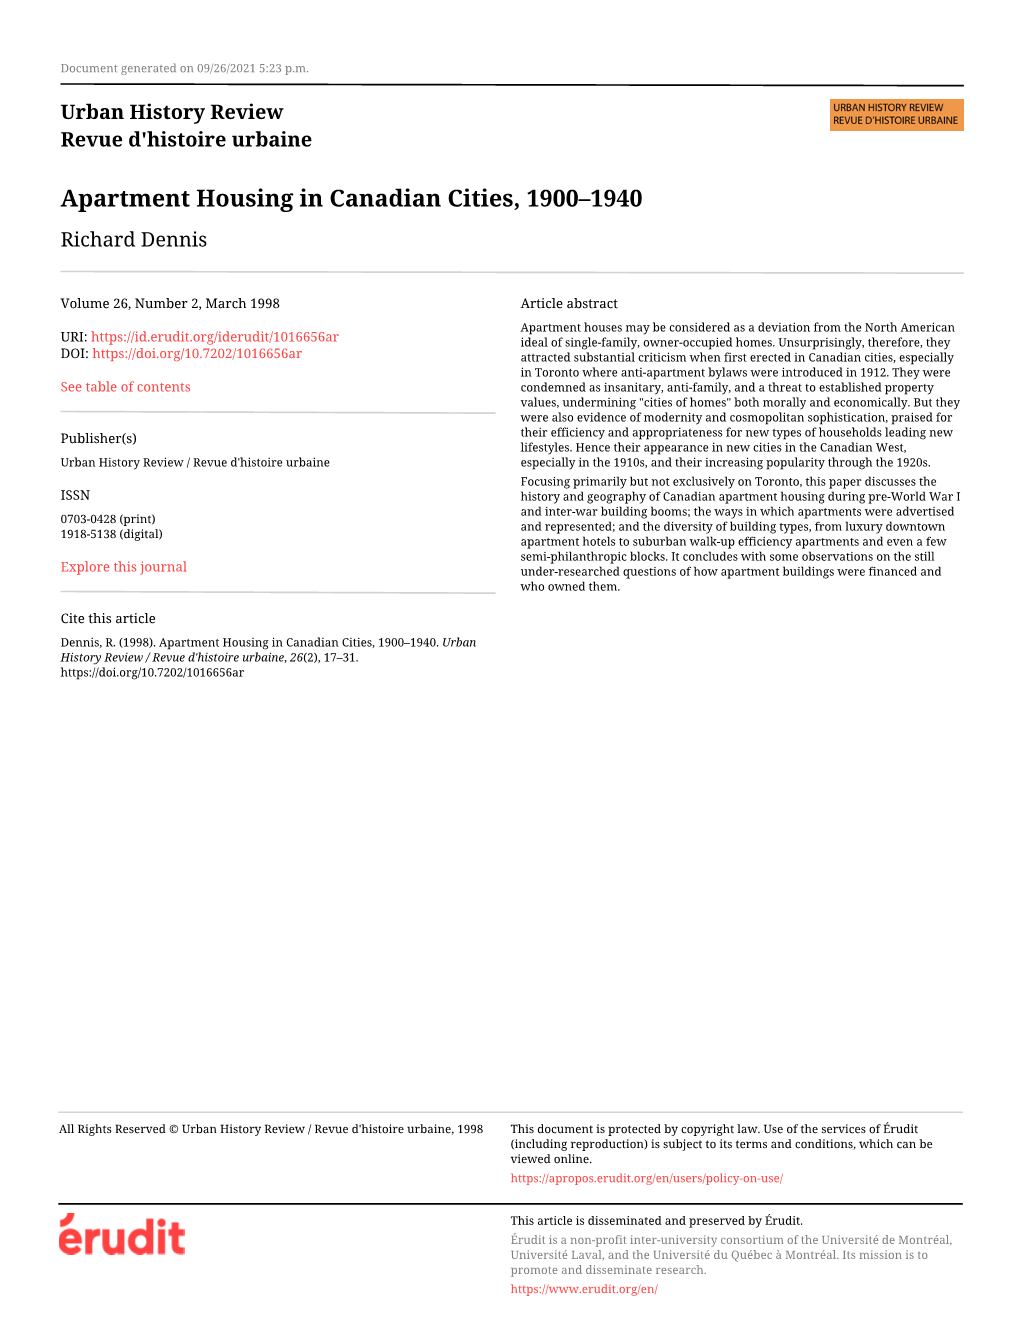 Apartment Housing in Canadian Cities, 1900–1940 Richard Dennis